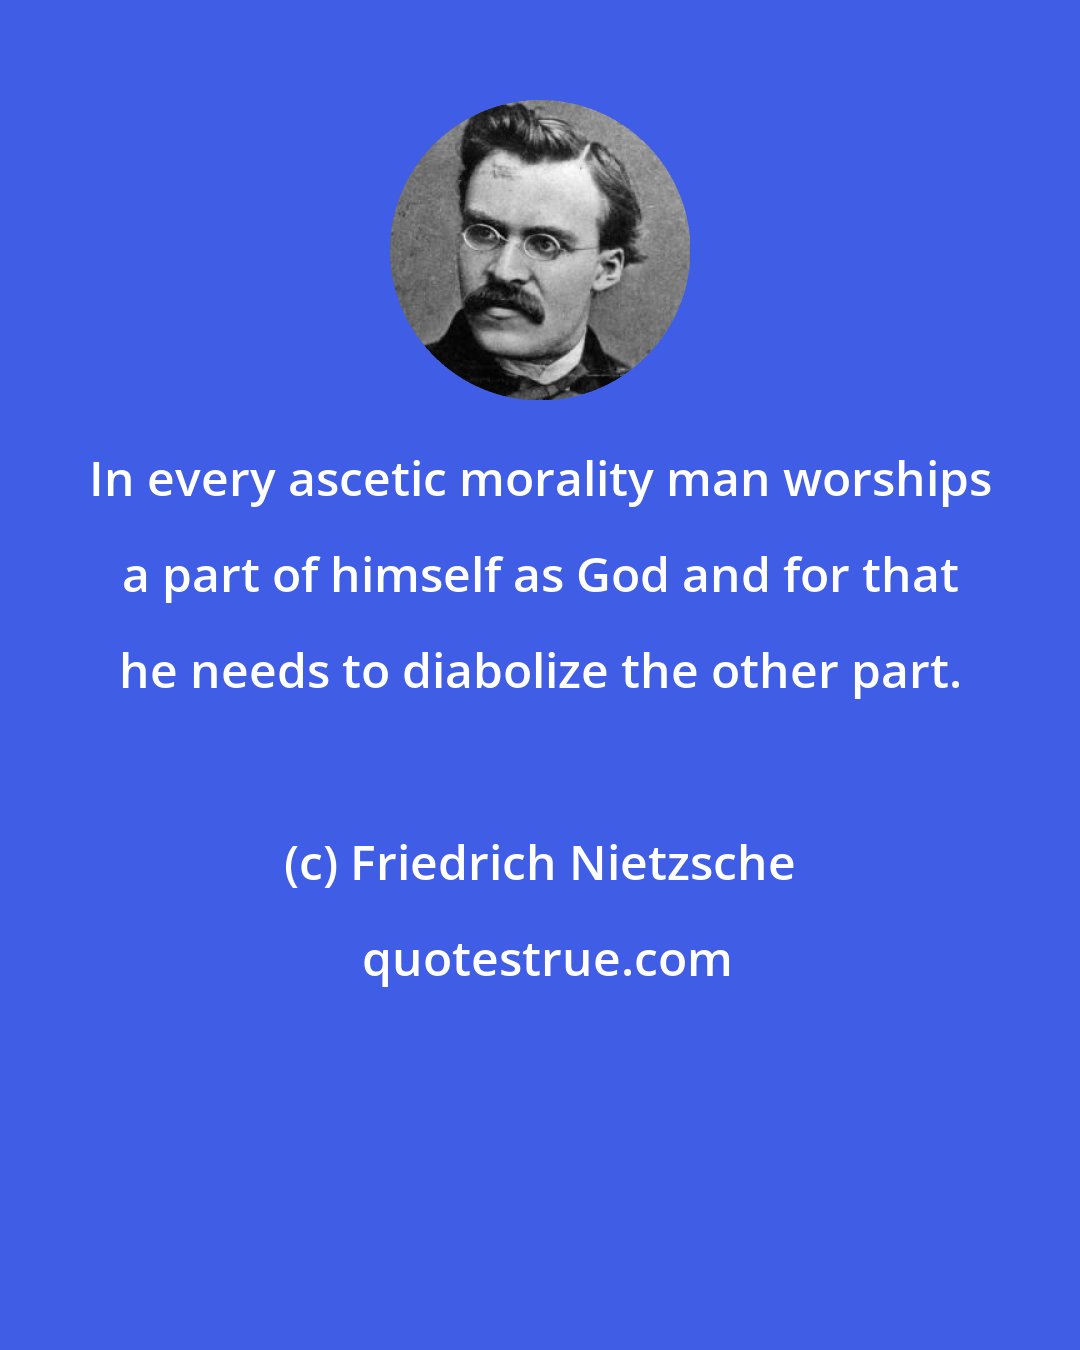 Friedrich Nietzsche: In every ascetic morality man worships a part of himself as God and for that he needs to diabolize the other part.